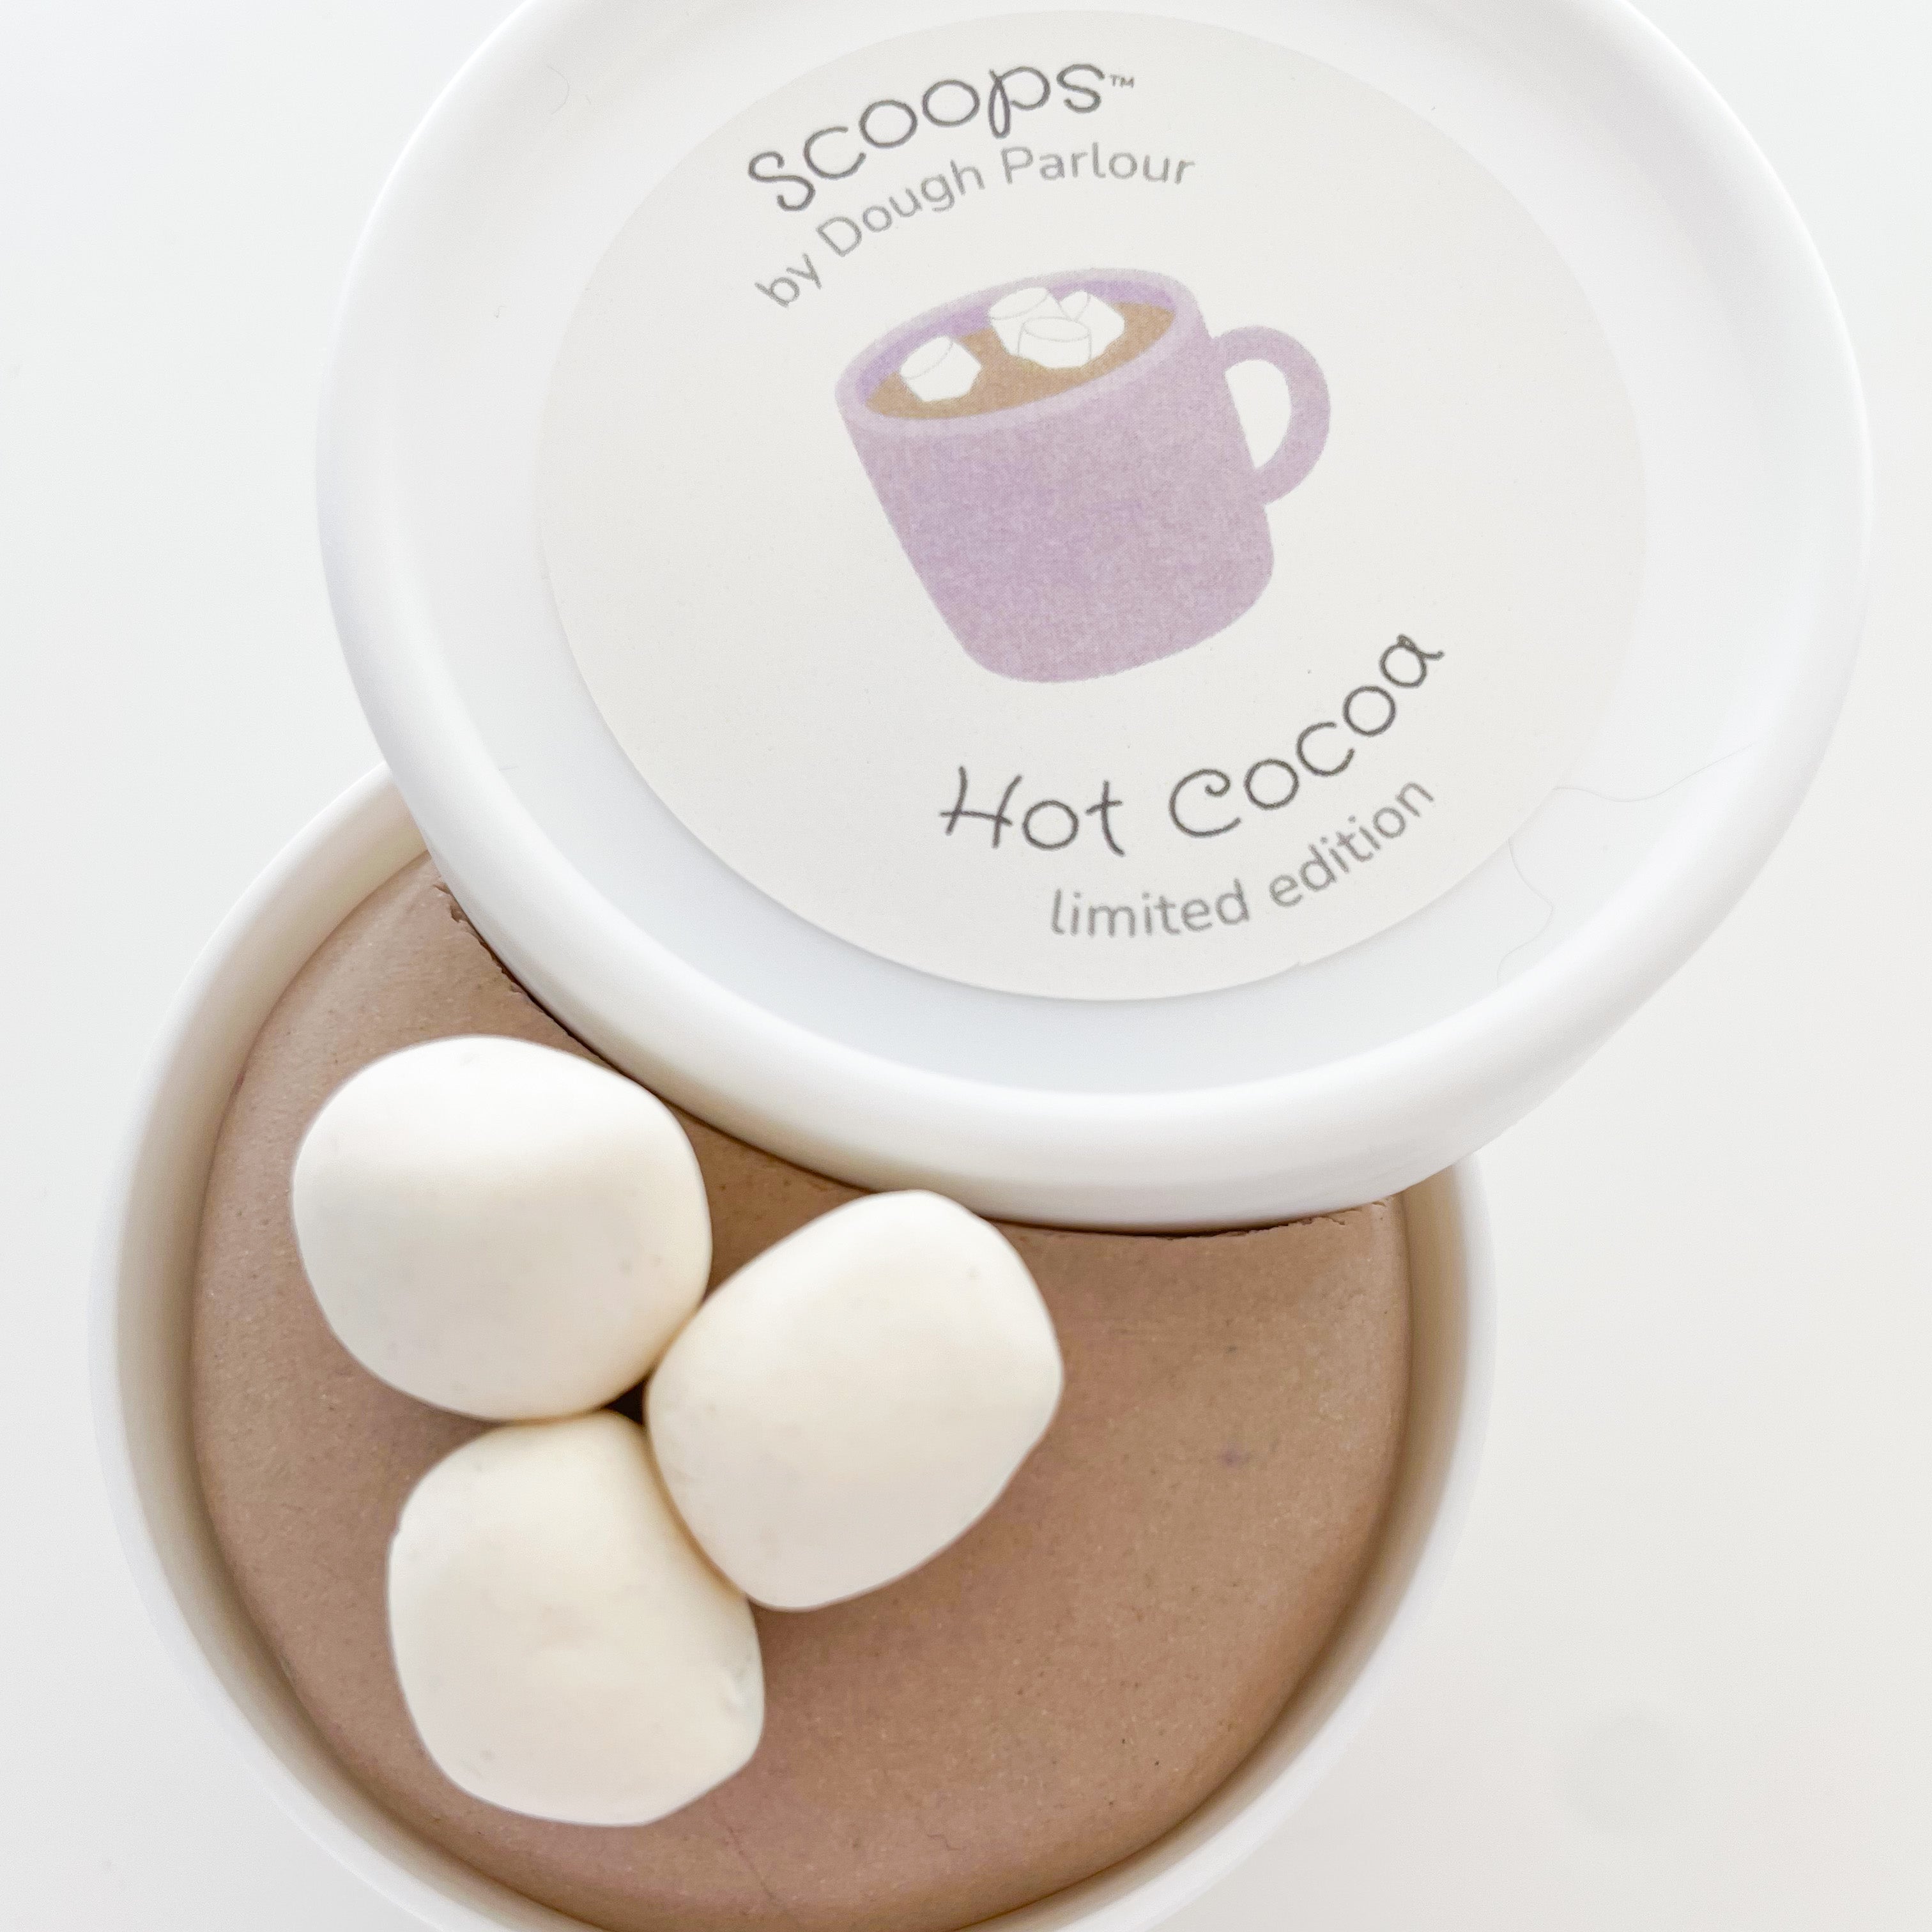 Scoops Hot Cocoa Play Dough